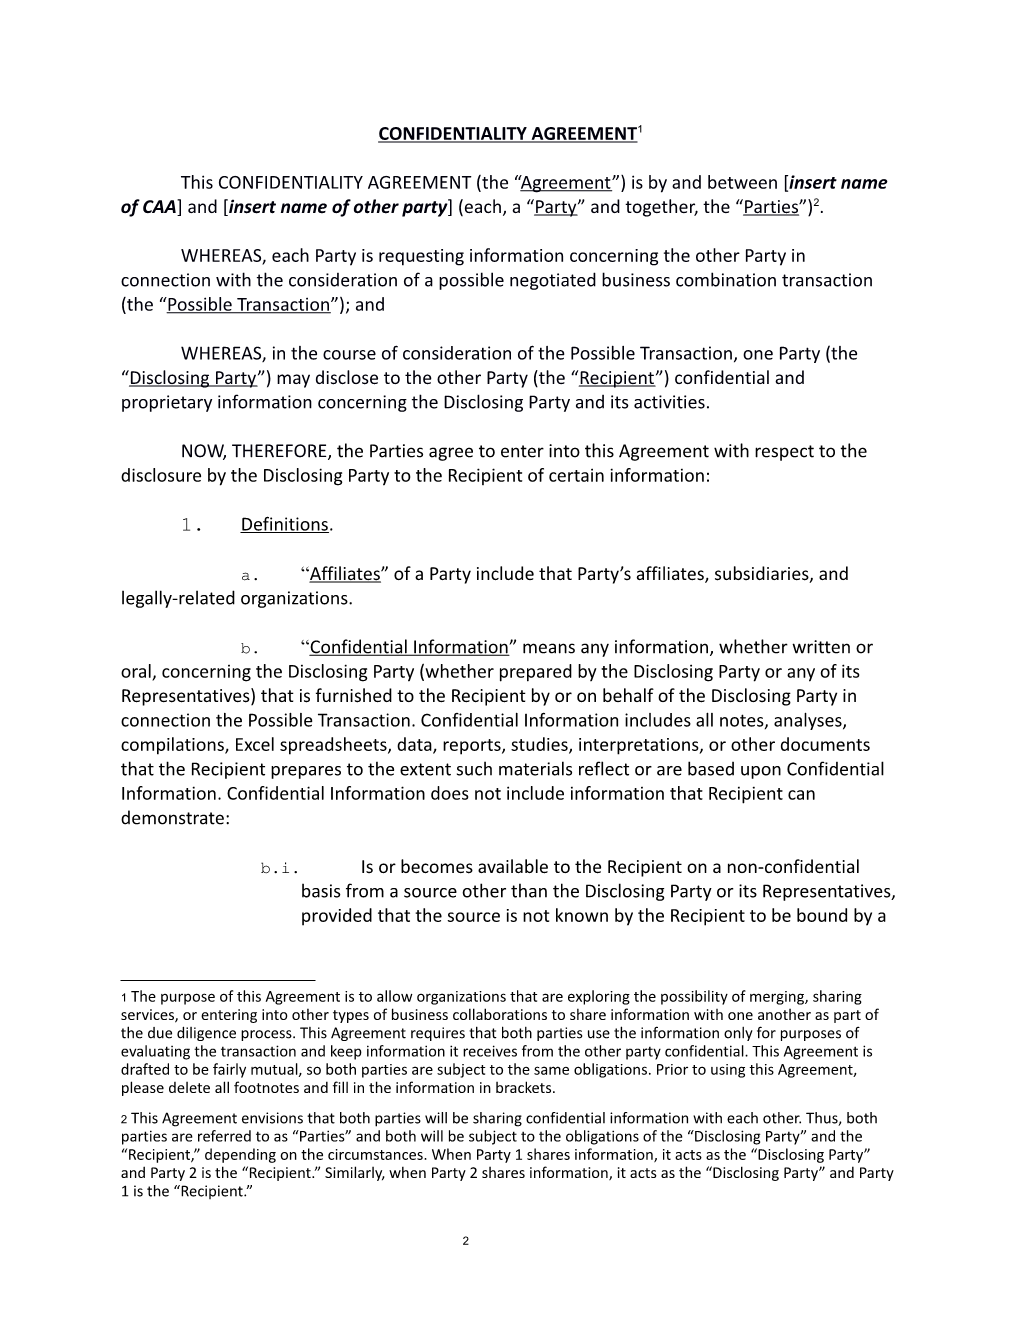 Sample Confidentiality Agreement For